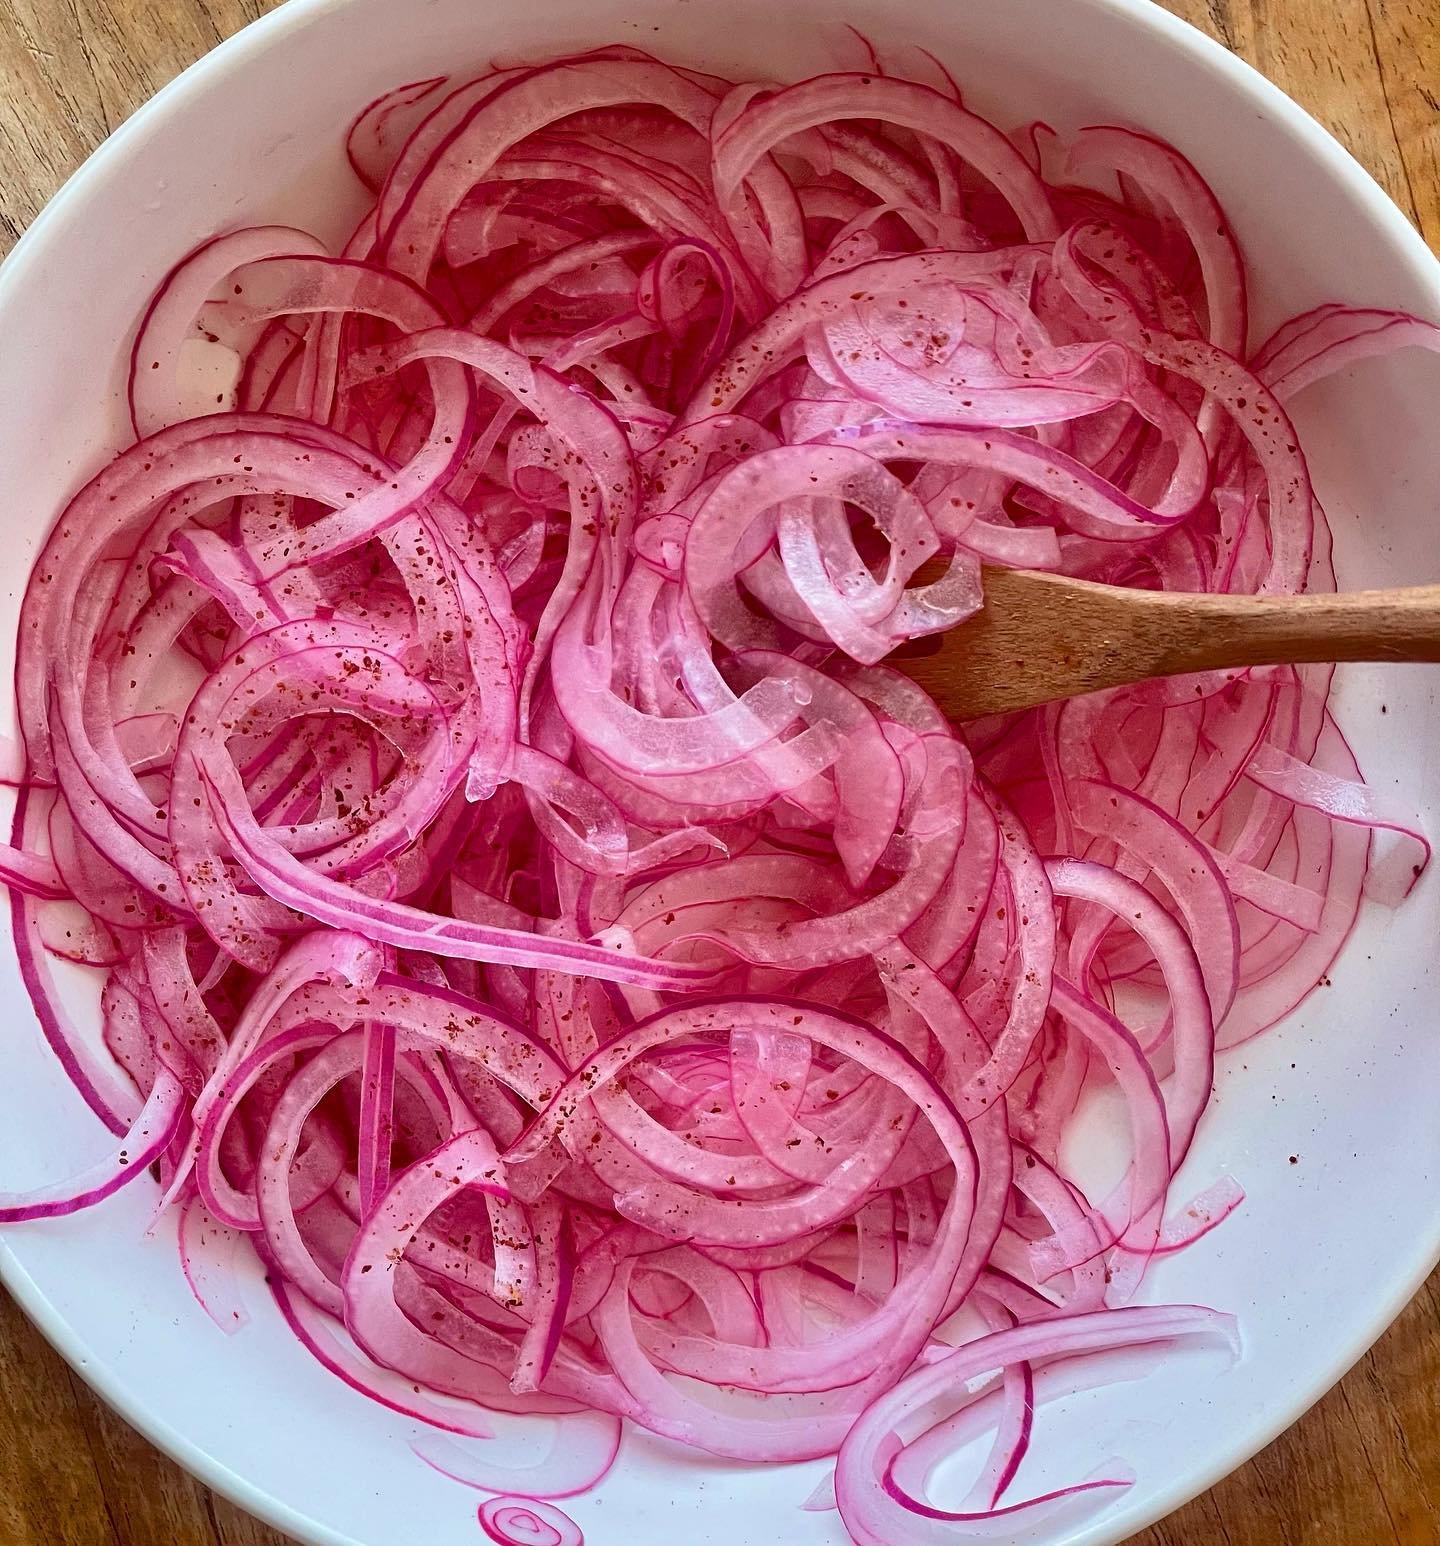 Pickled onions are a fridge staple for me. My rough rule of thumb is one red onion for one lemon (roughly the same size as each other). 

Finely slice the onion with a knife or mandolin, squeeze the lemon juice over it, a pinch of salt and a pinch of